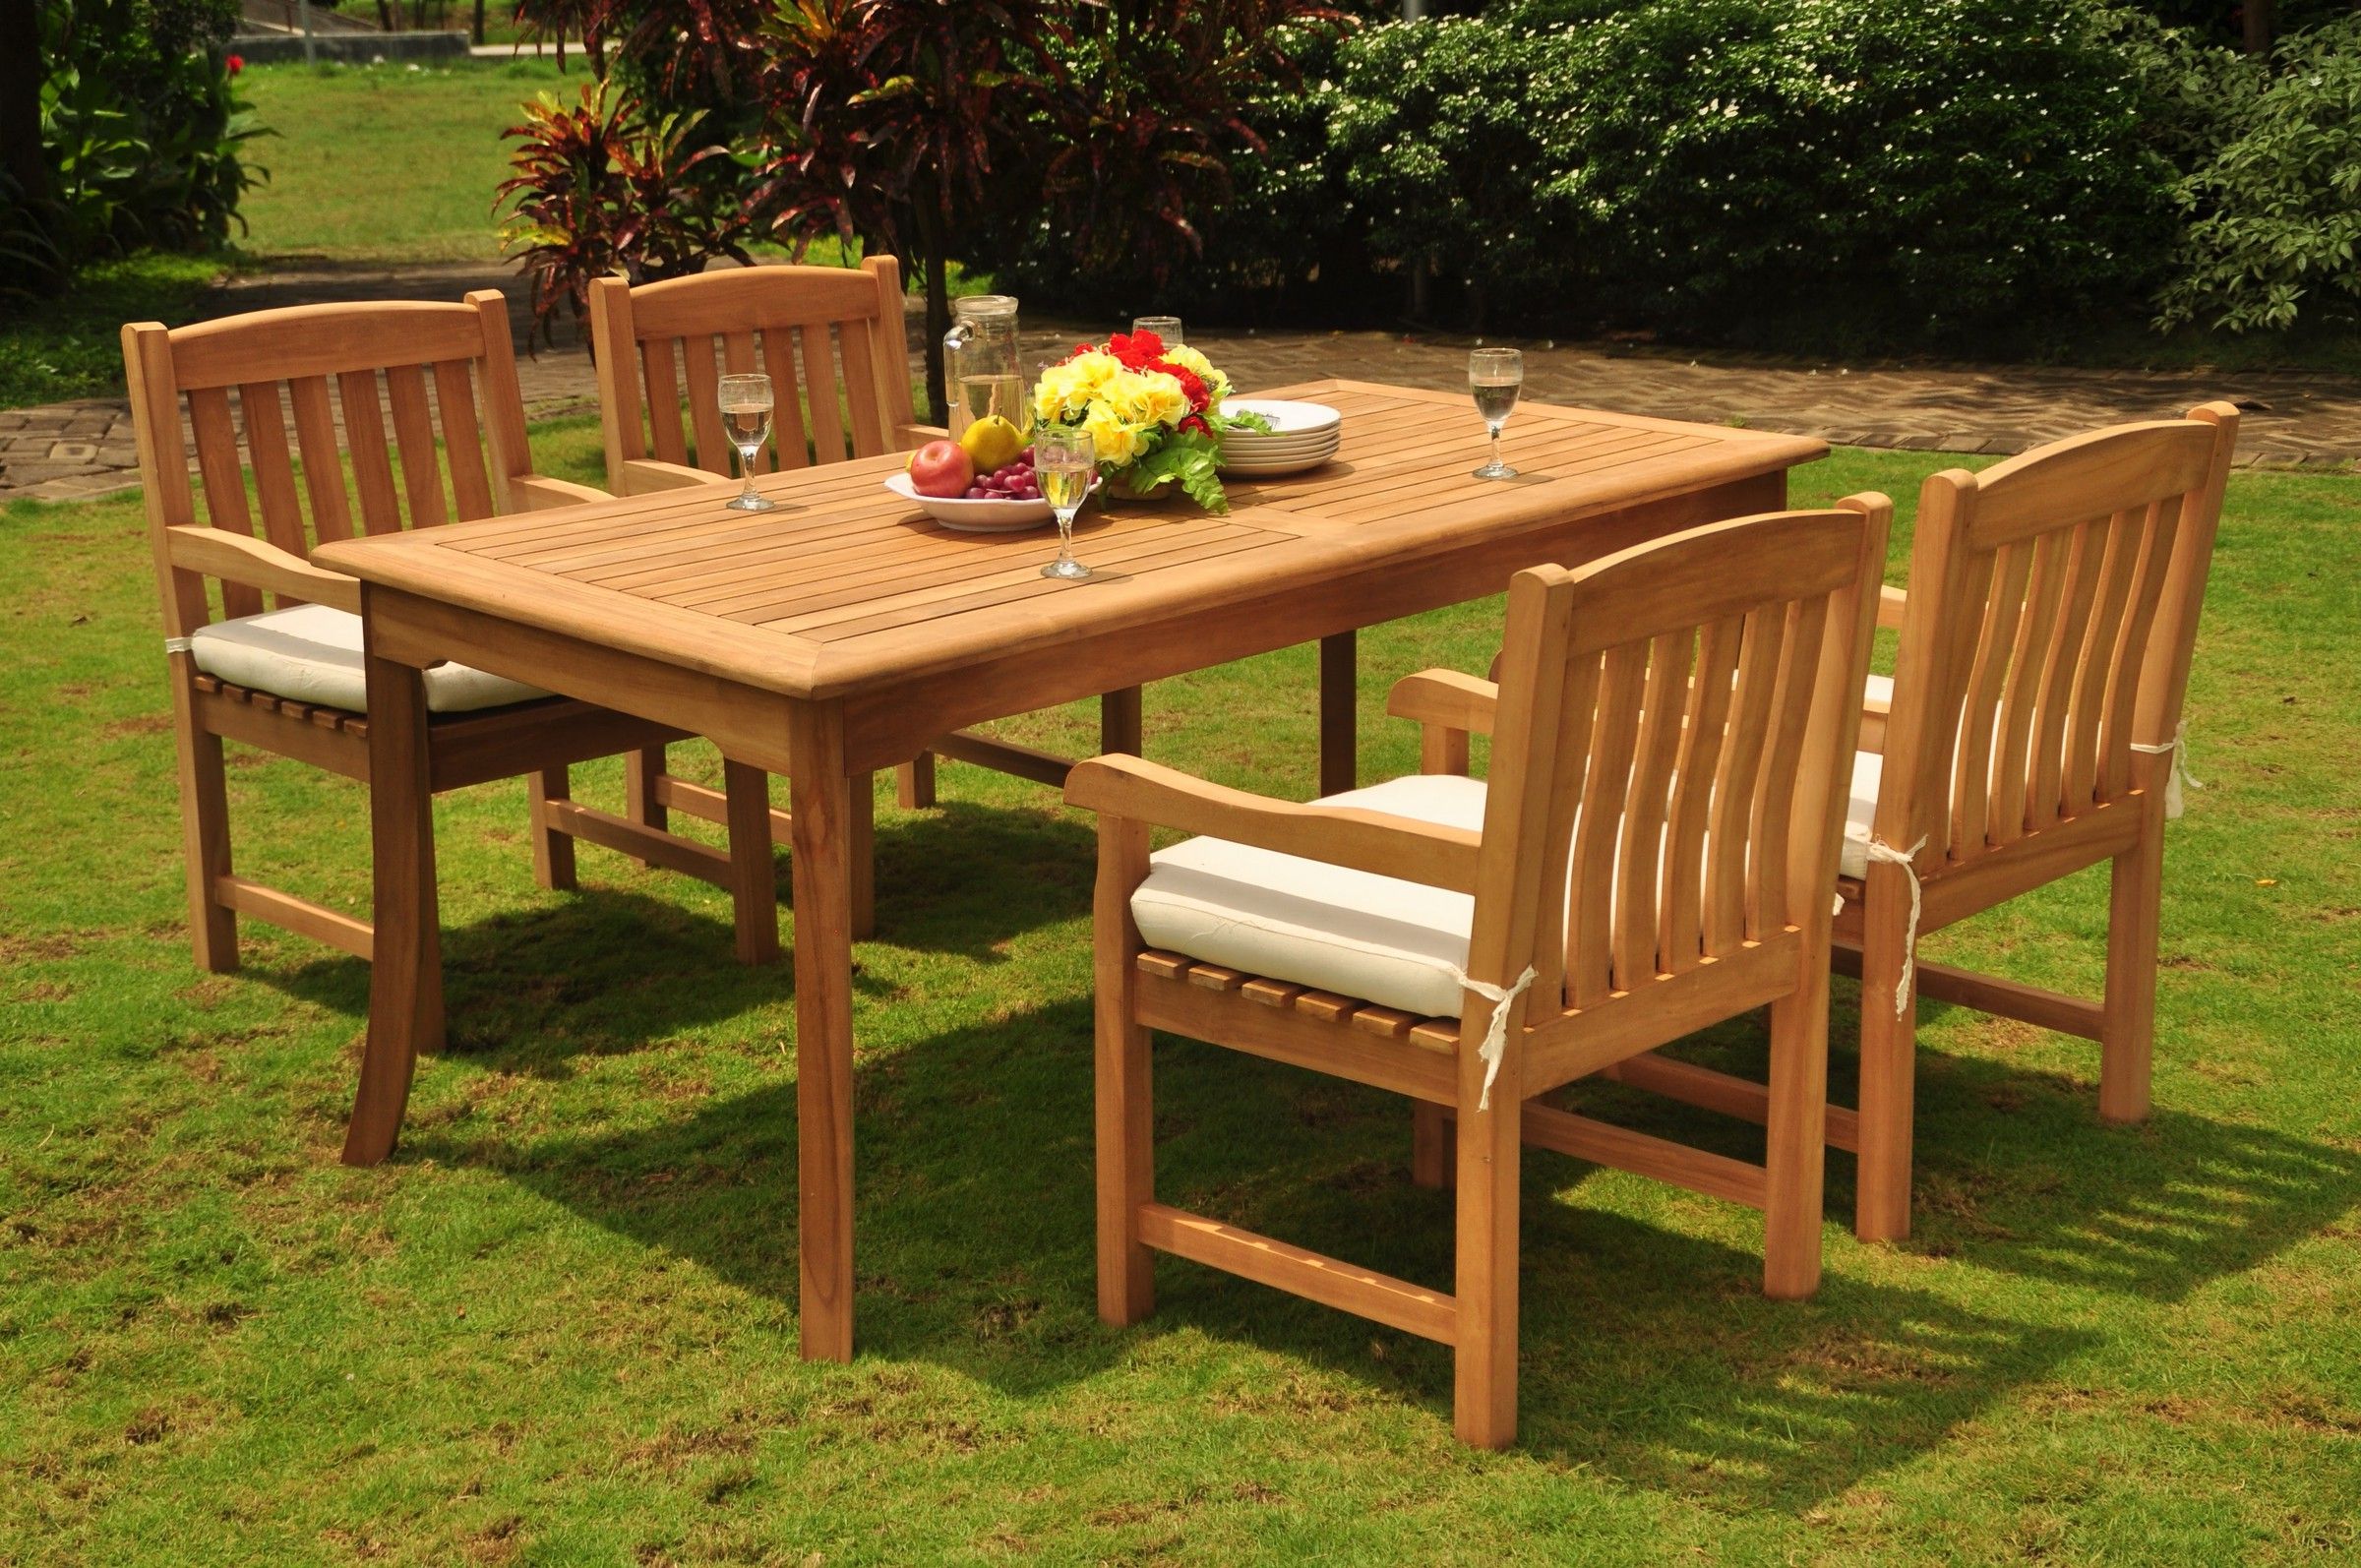 Teak Dining Set: 4 Seater 5 Pc: 71" Rectangle Dining Table And 4 Devon With Regard To Trendy Teak Wood Rectangular Patio Dining Sets (View 10 of 15)